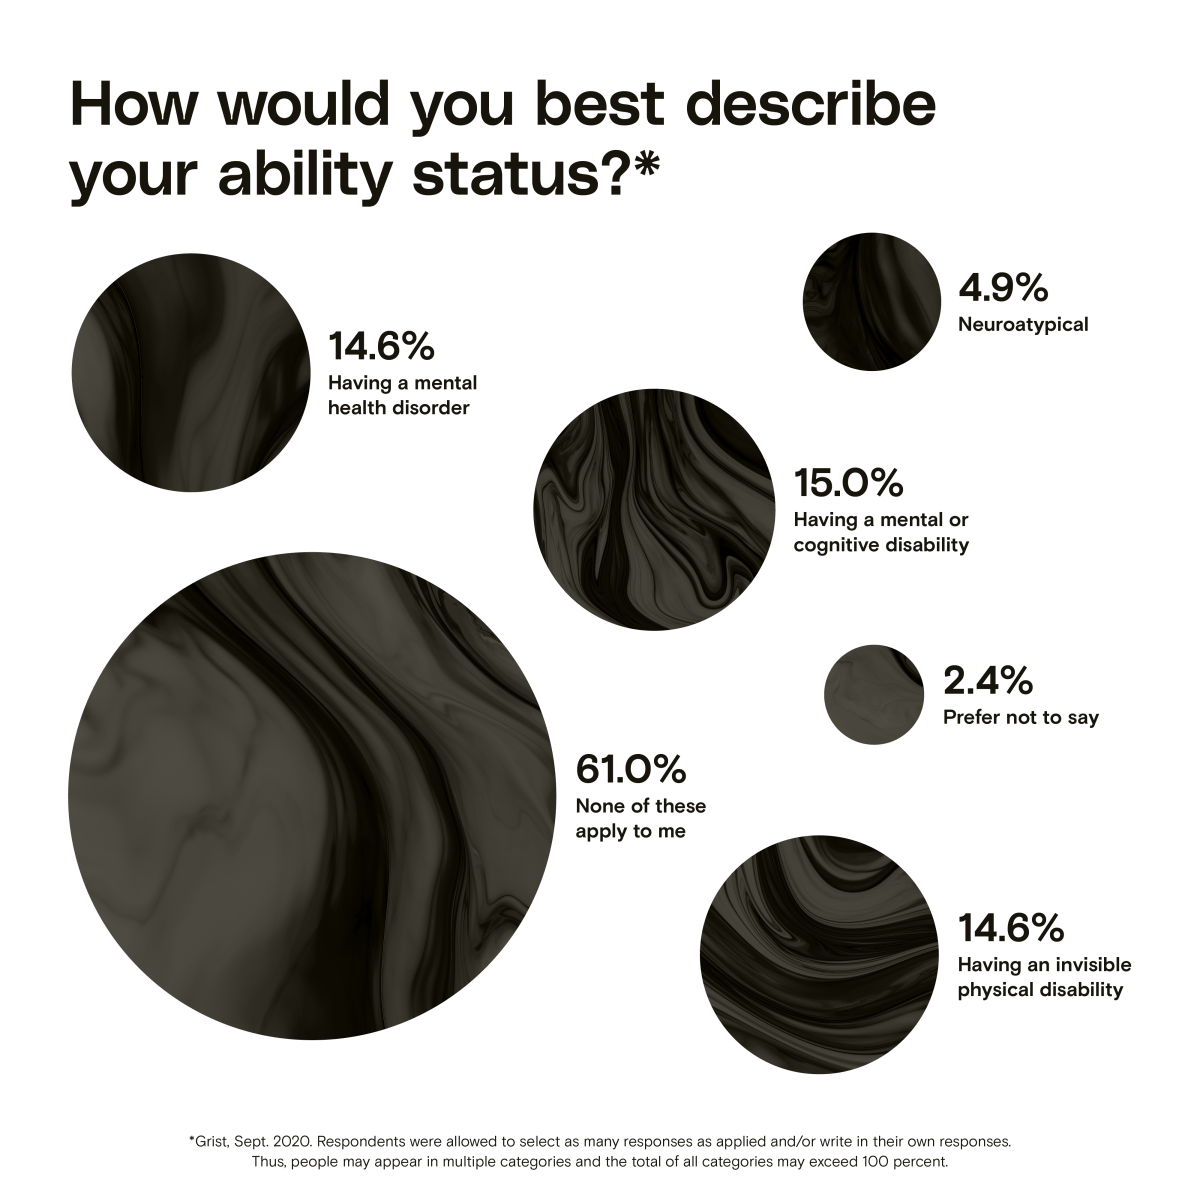 A bubble chart showing ability status among Grist staff in 2020. The three largest groups are None of these apply to me (61%), Having a mental or cognitive disability (15%), and Having a mental health disorder or Having an invisible physical disability (two categories, each with 14.6%).